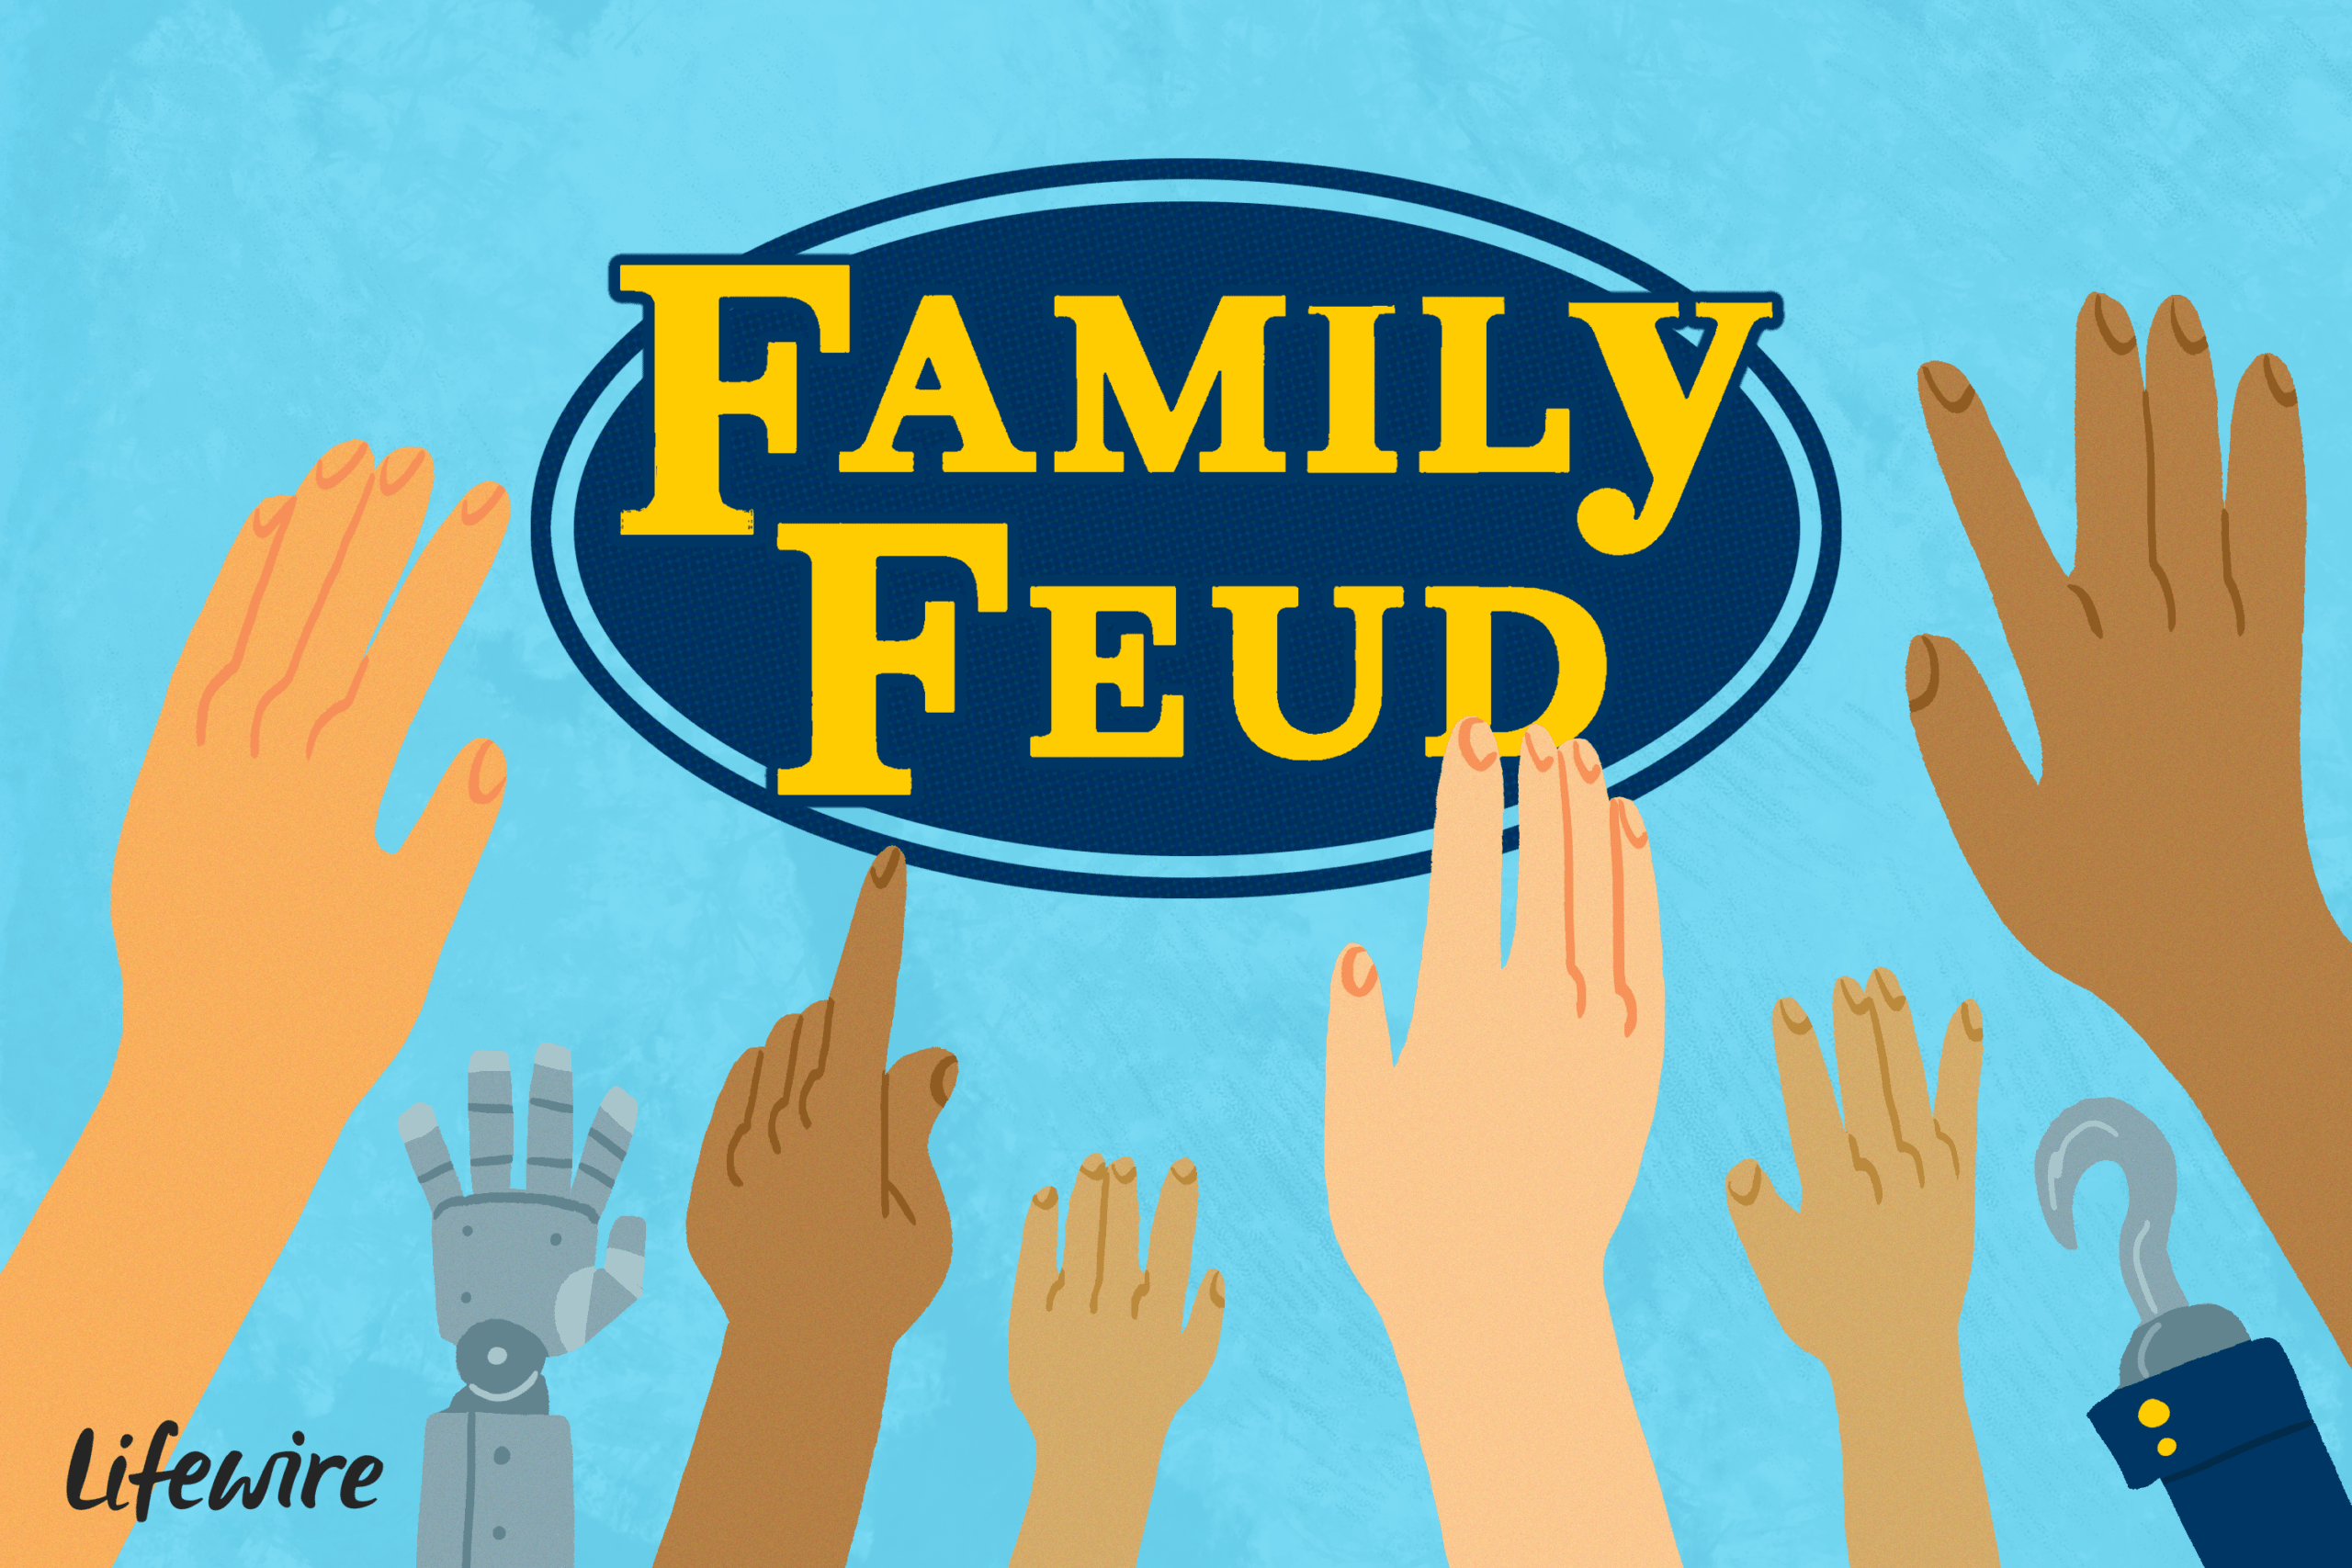 4 Best Free Family Feud Powerpoint Templates Throughout Family Feud Powerpoint Template Free Download